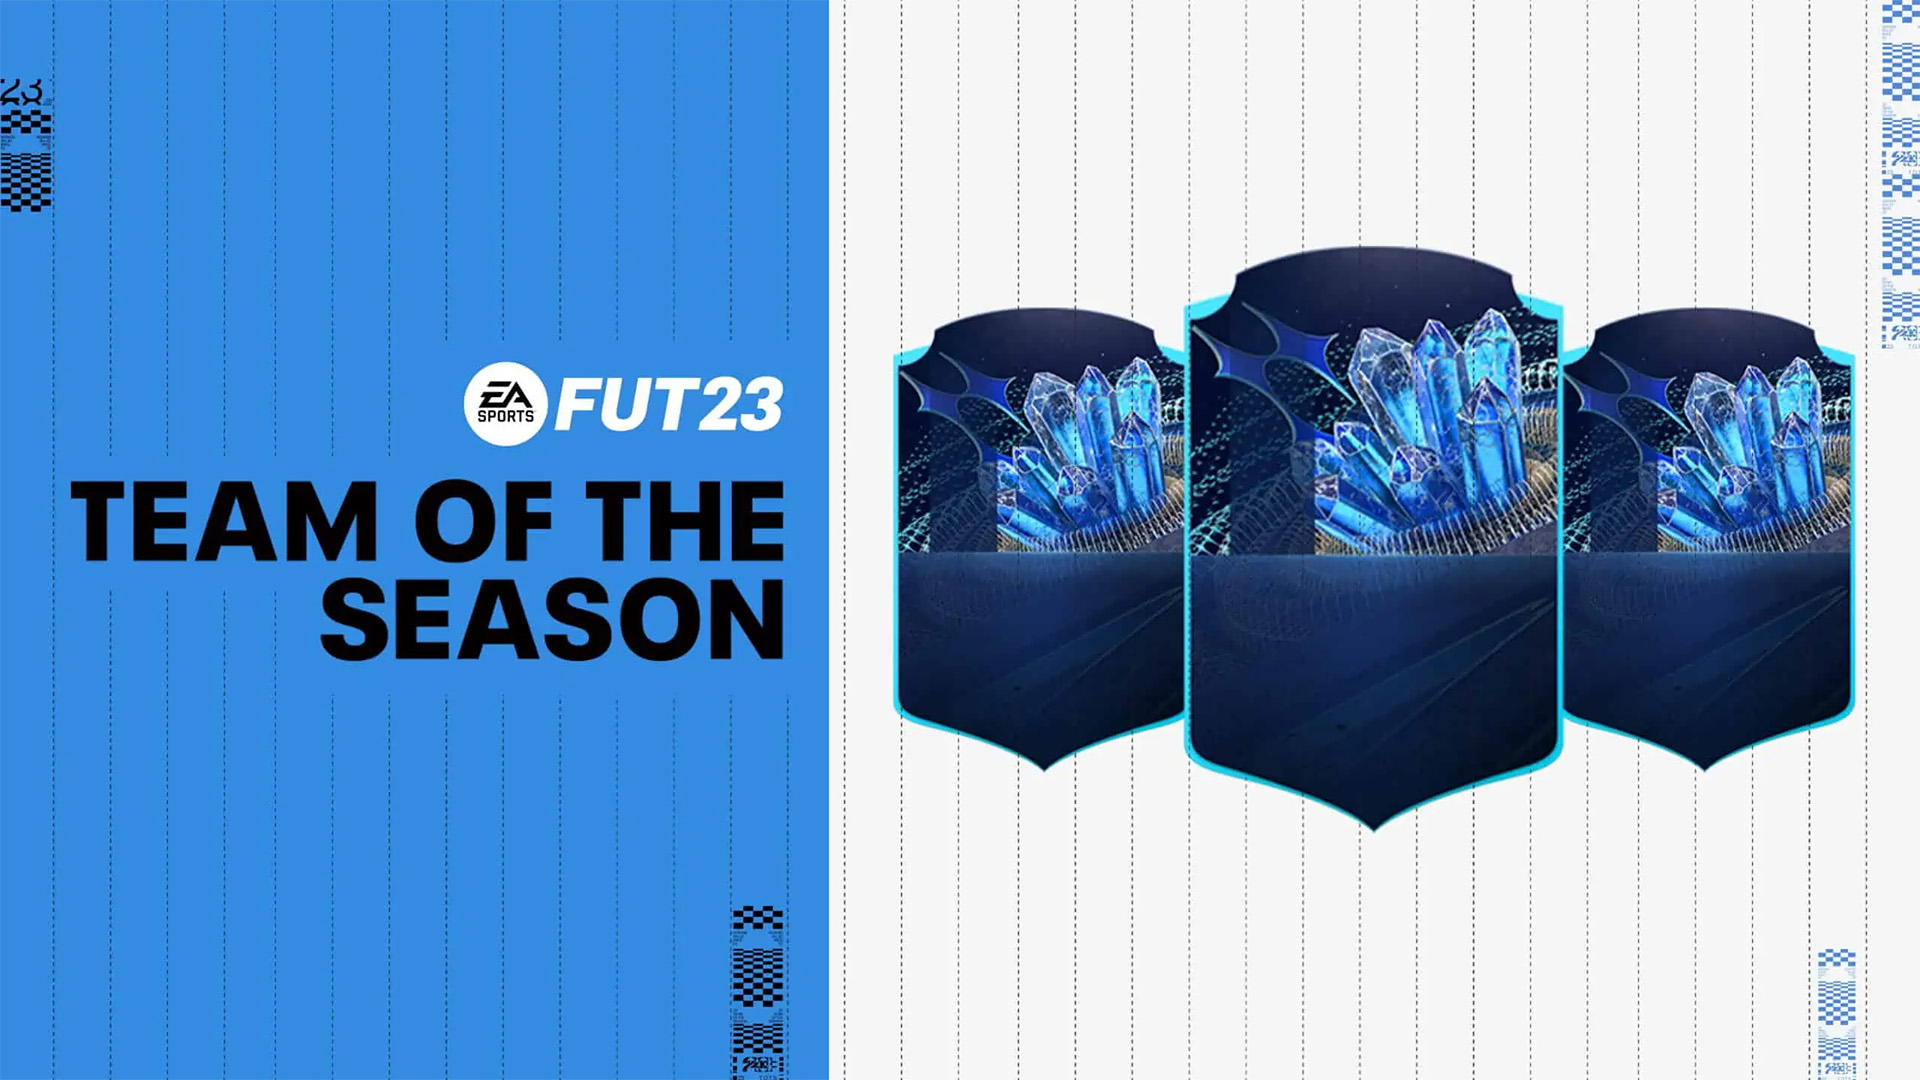 FIFA 23 Community TOTS how to vote and nominees